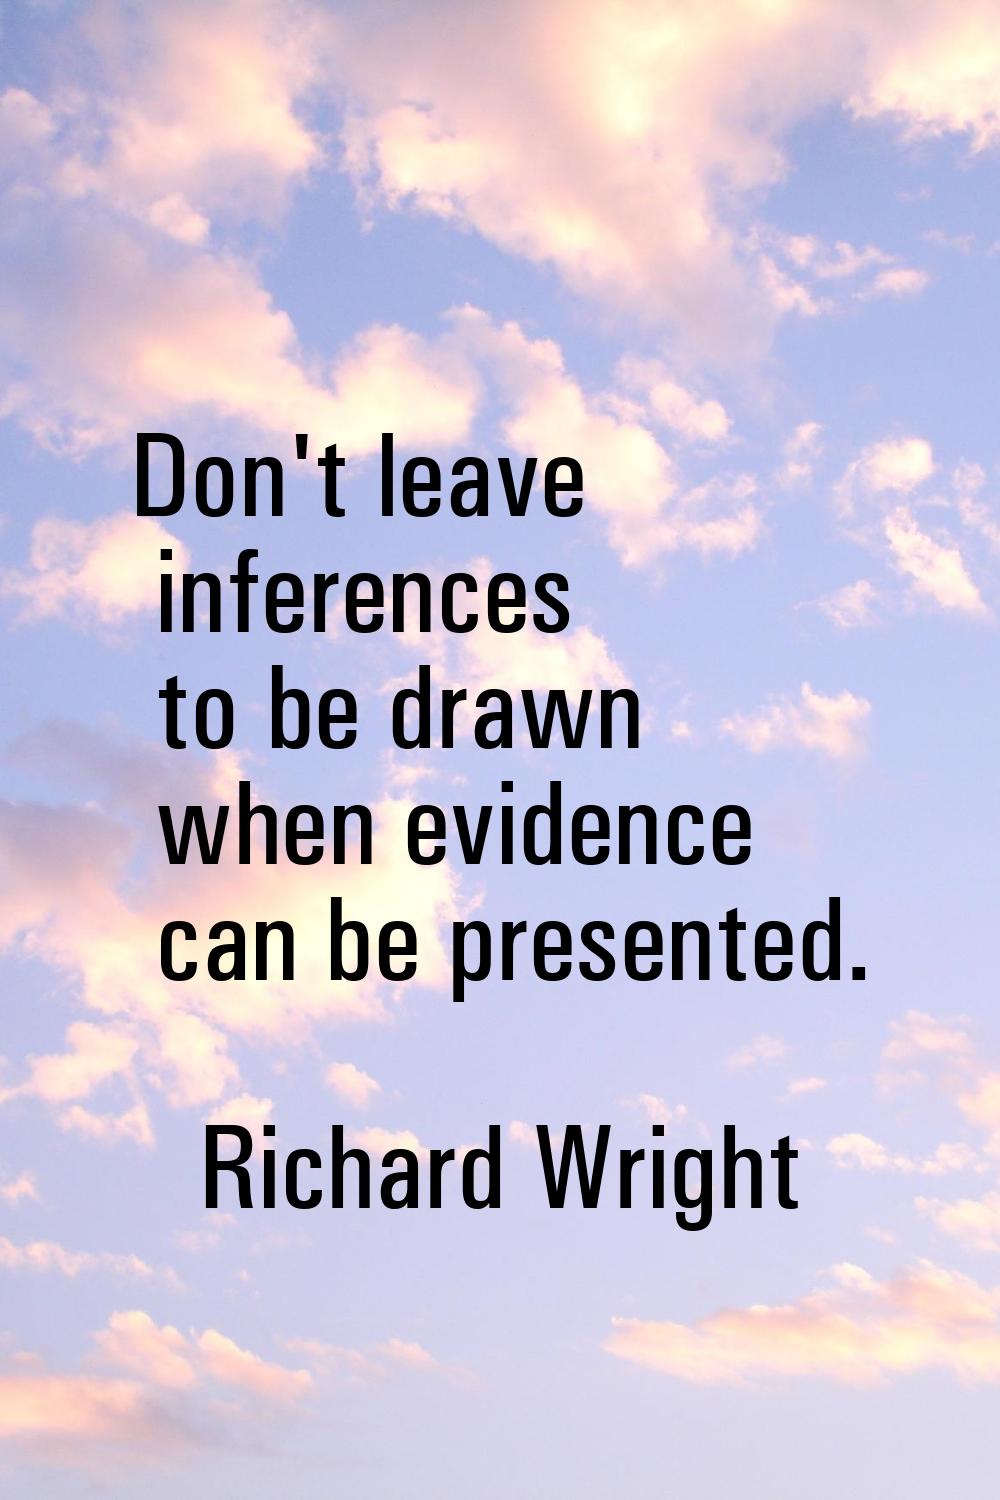 Don't leave inferences to be drawn when evidence can be presented.